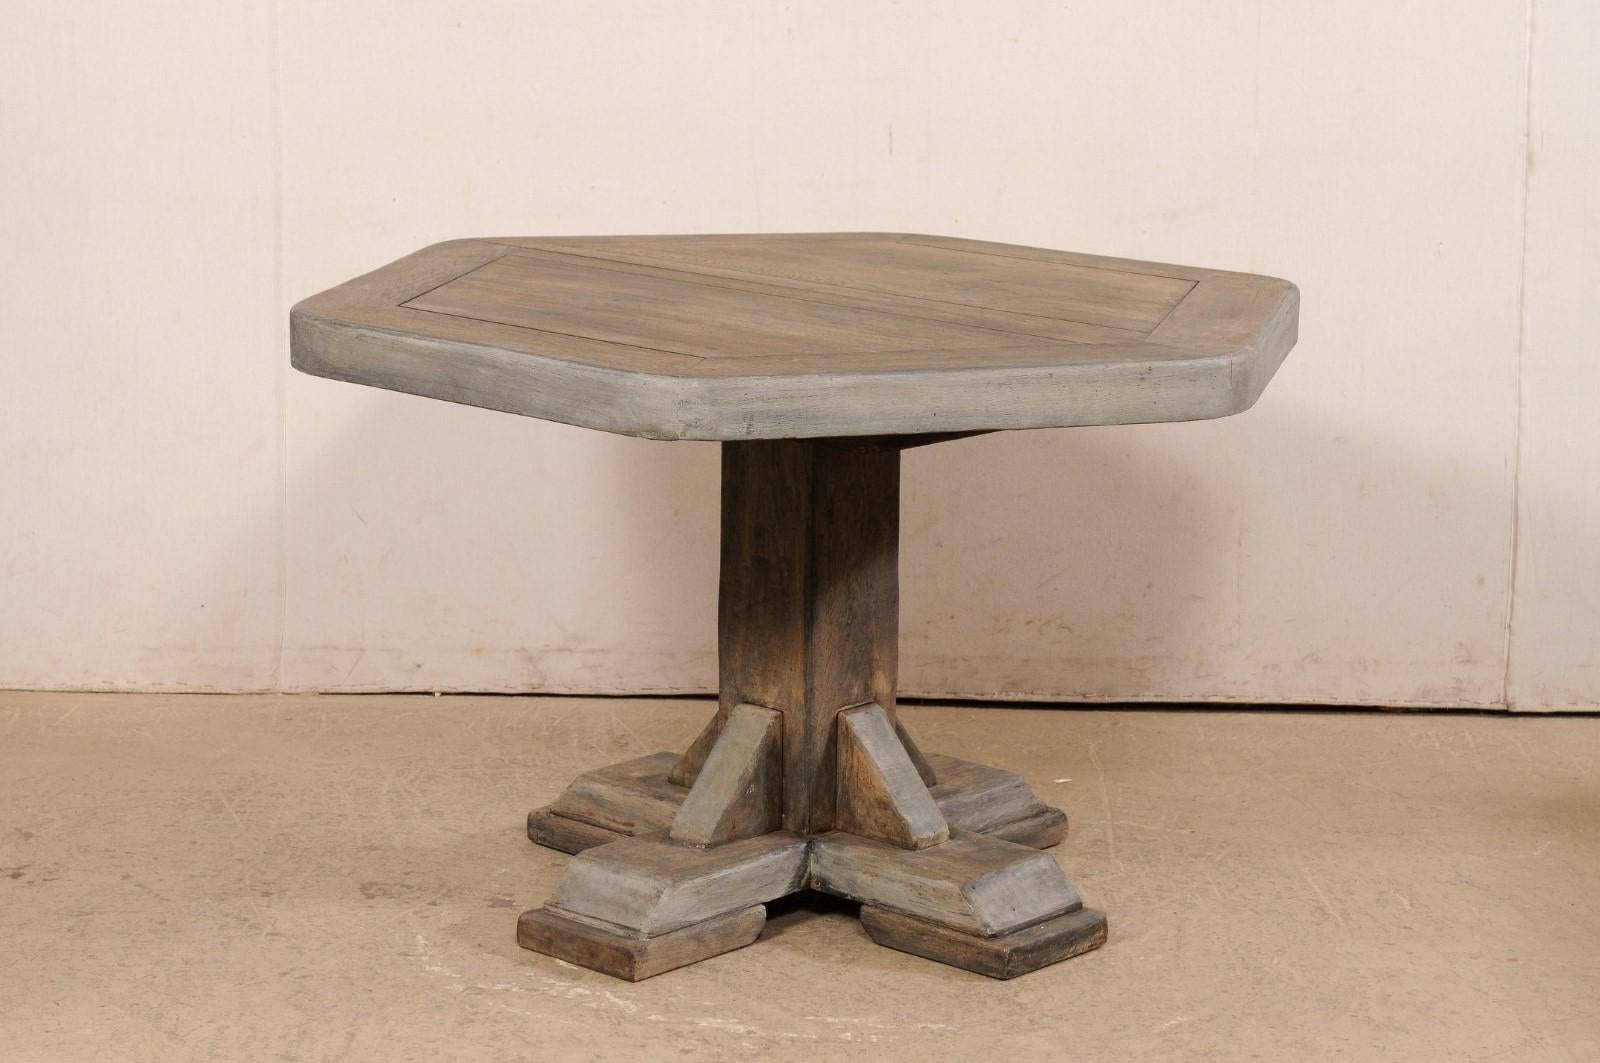 European Hexagon-Shaped Wooden Pedestal Table, Mid 20th century For Sale 6